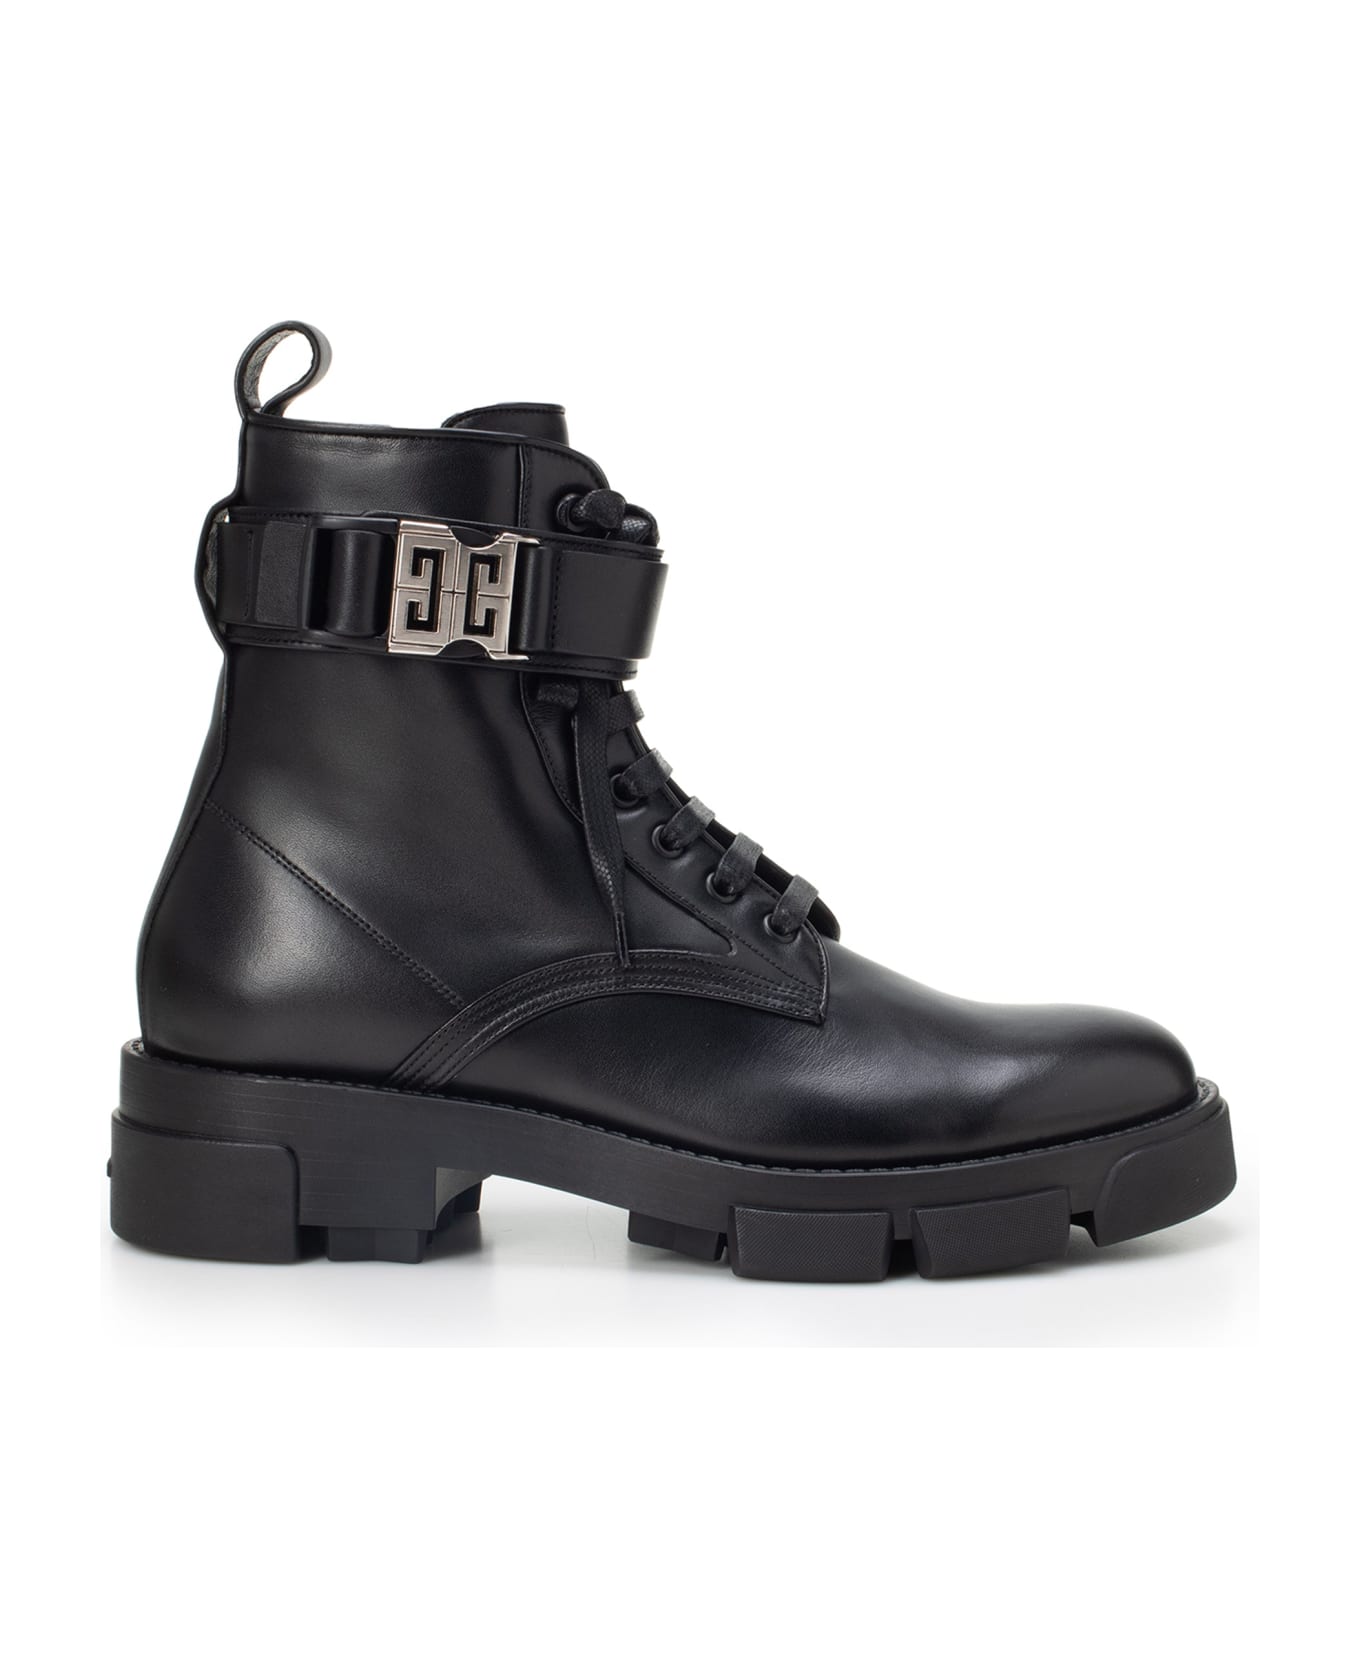 Givenchy Leather Combat Boots - Black ブーツ